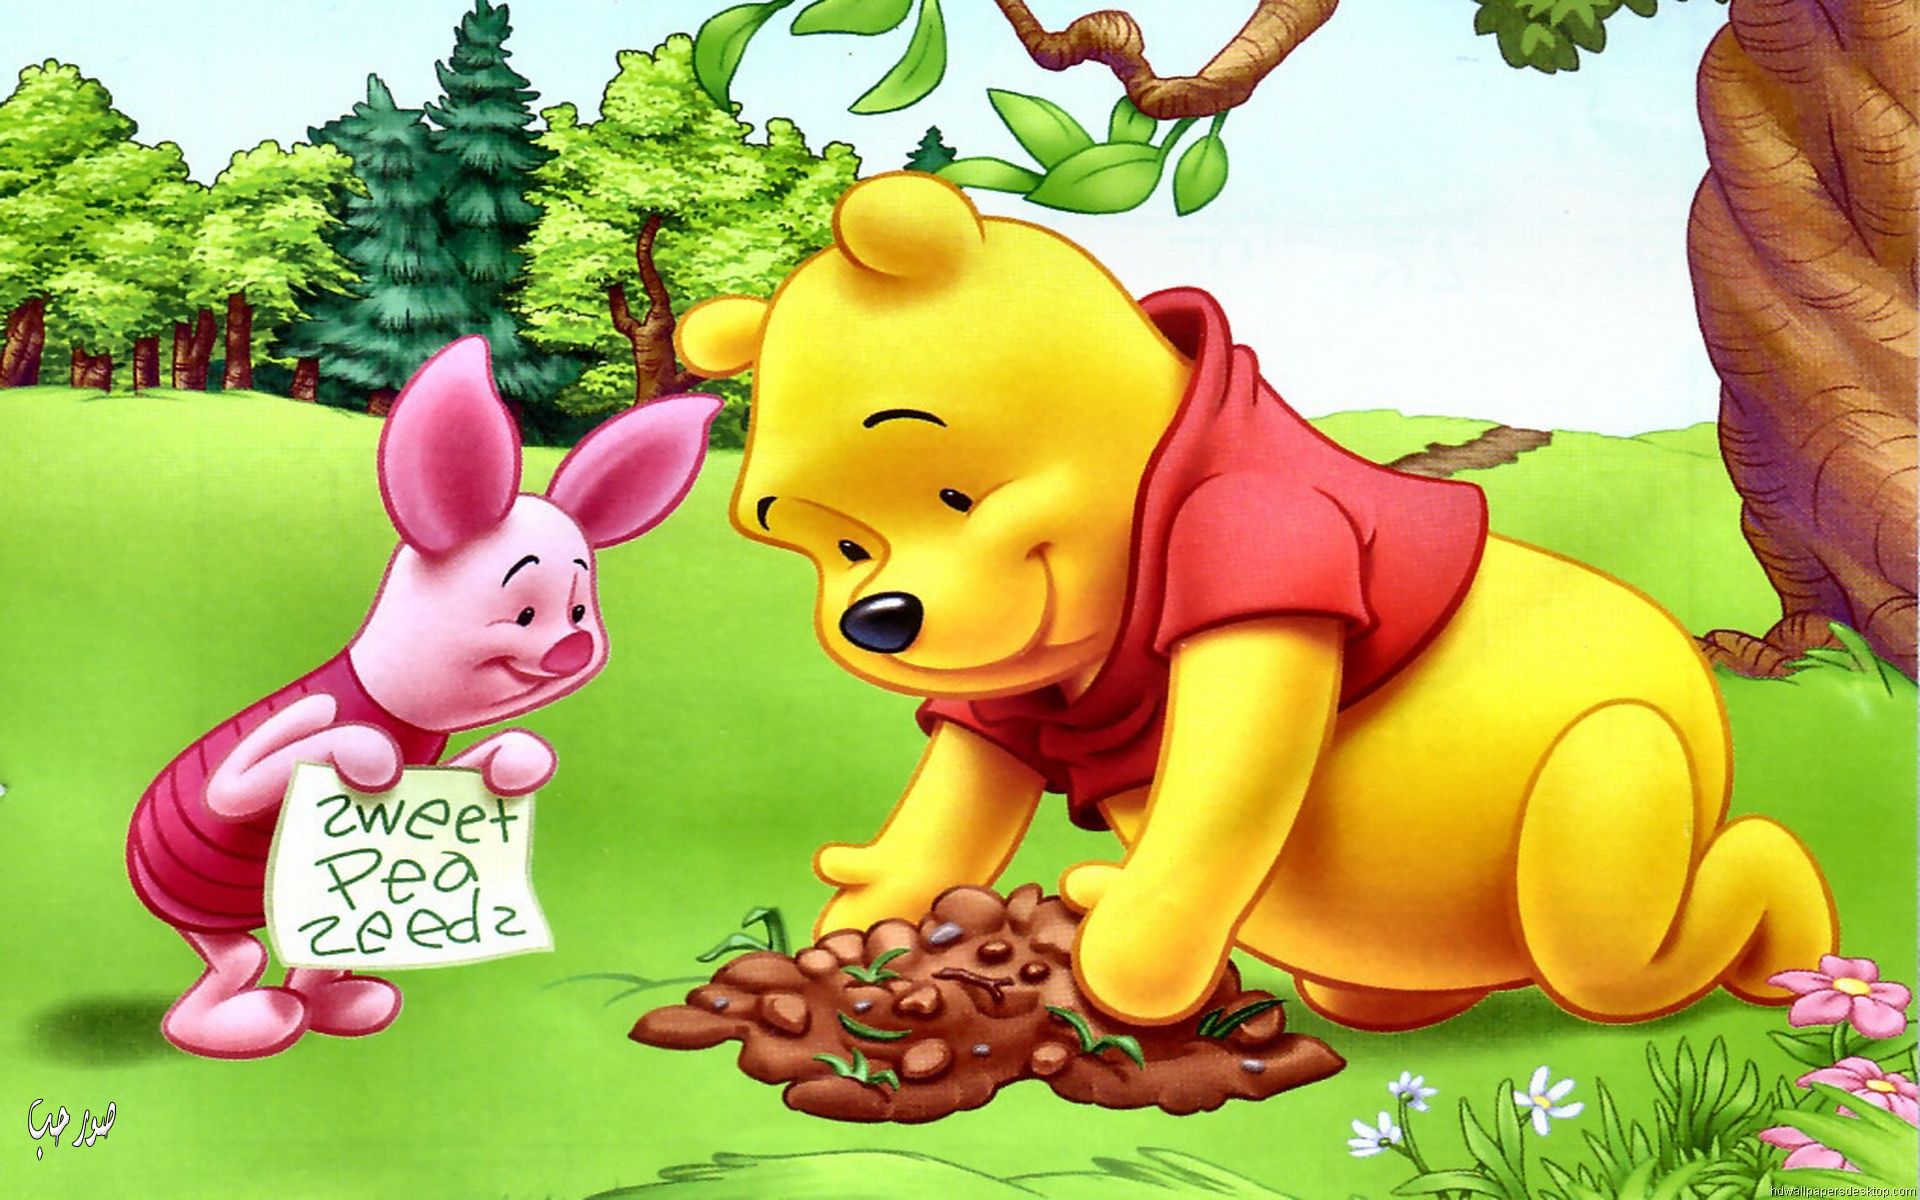 Piglet And Winnie The Pooh Planting Flowers Hd Wallpapers 1920x1200.